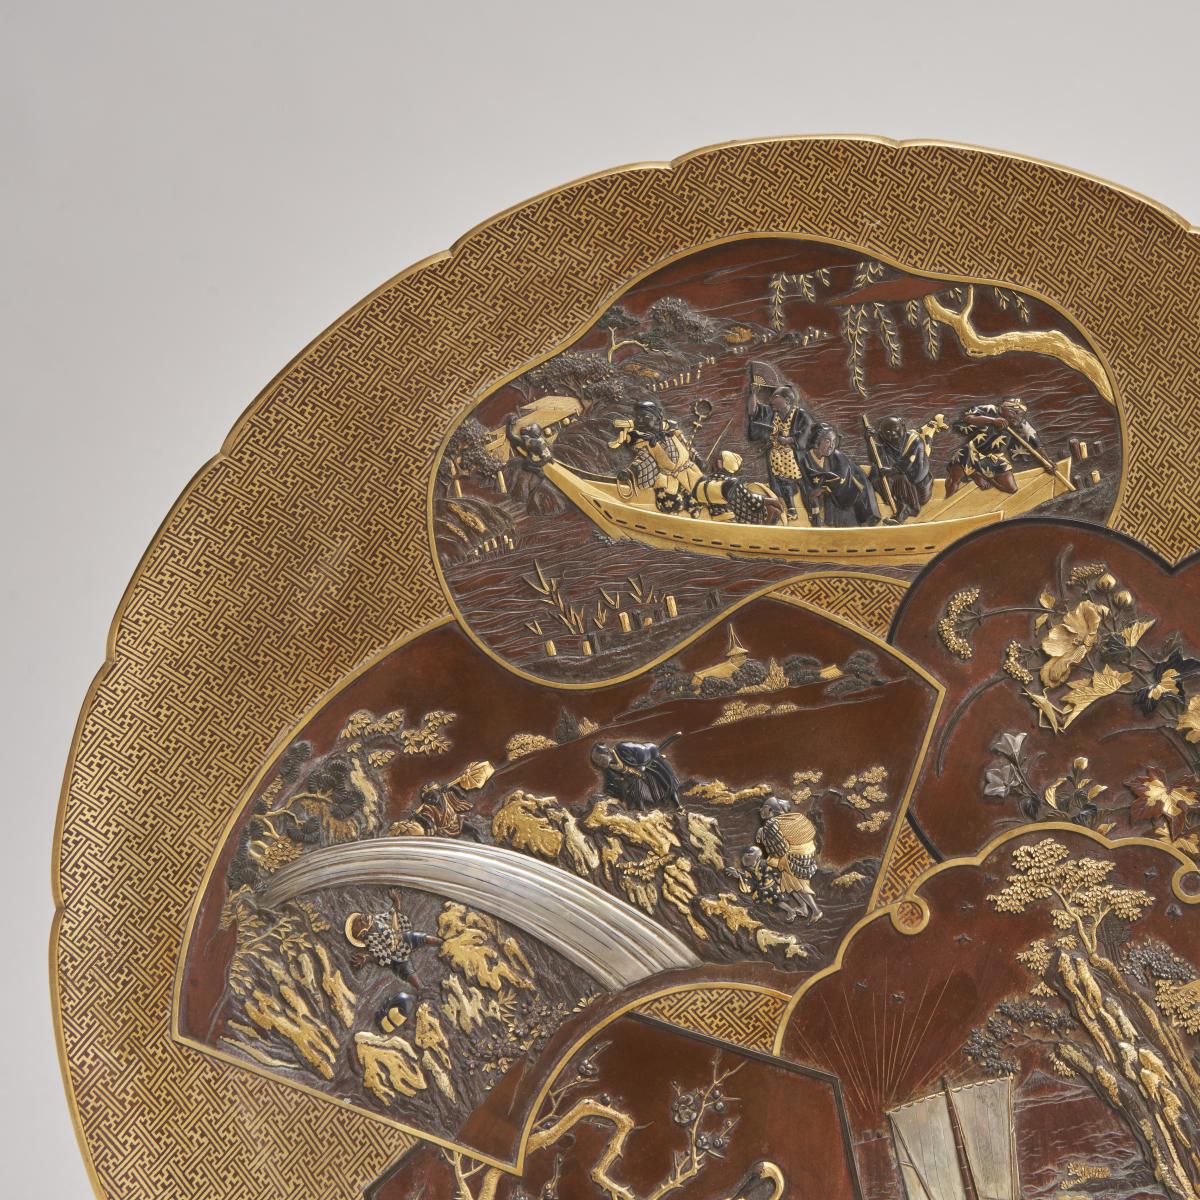 An impressive Bronze and Multi-metal charger signed Fuji (Japanese, late 19th Century)